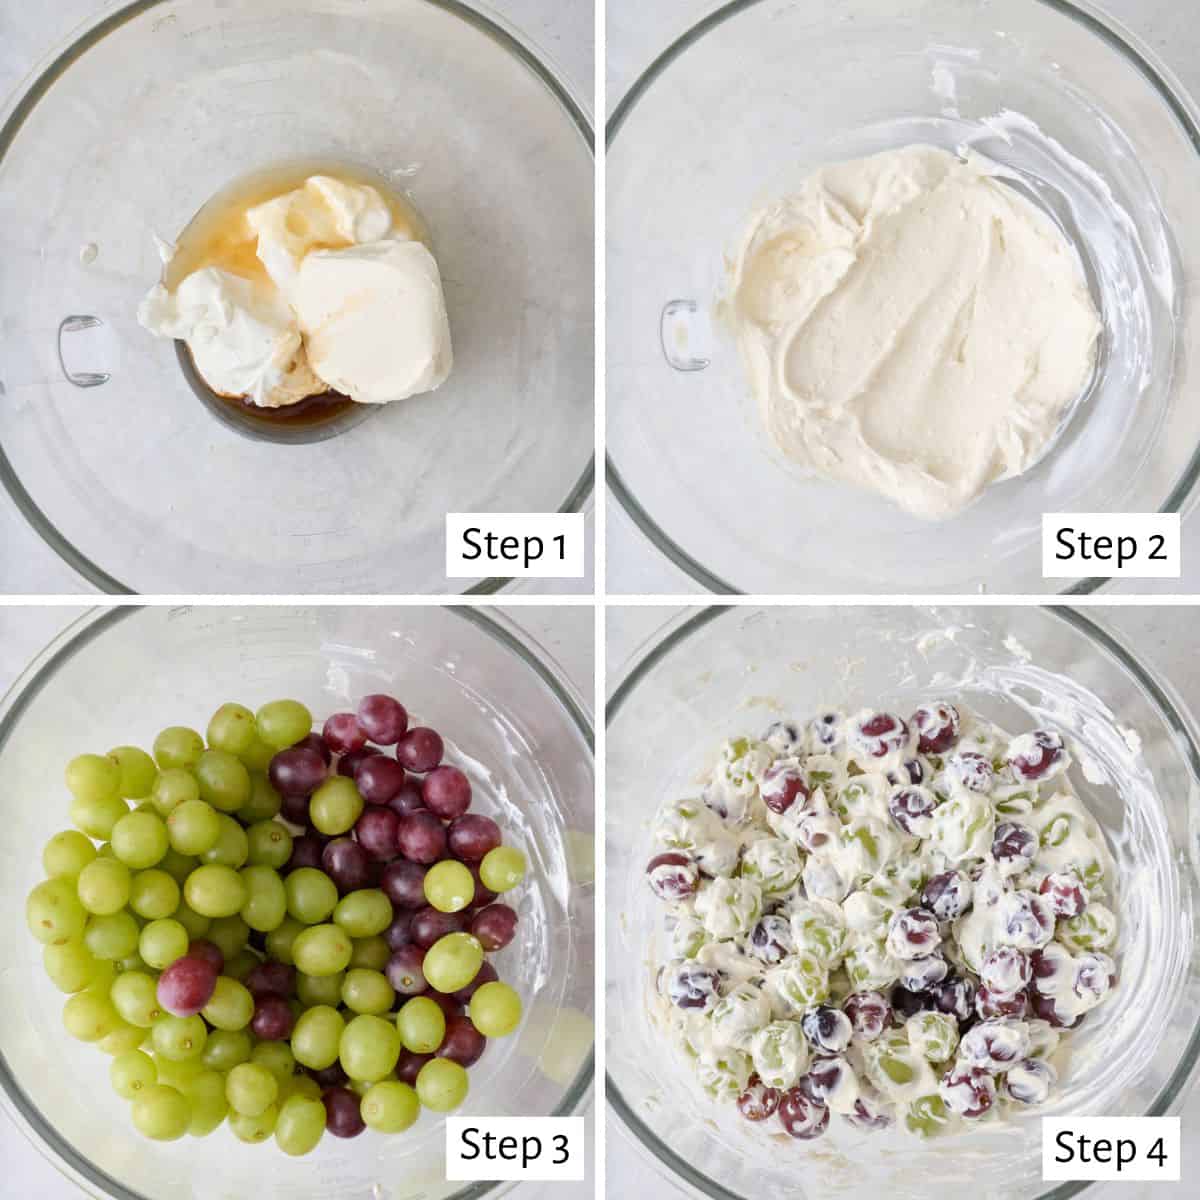 4-image collage making recipe: 1 - Cream cheese, yogurt, honey, and vanilla before mixed; 2 - After mixed; 3 - Grapes added on top; 4 - Grapes folded with the cream cheese mixture.